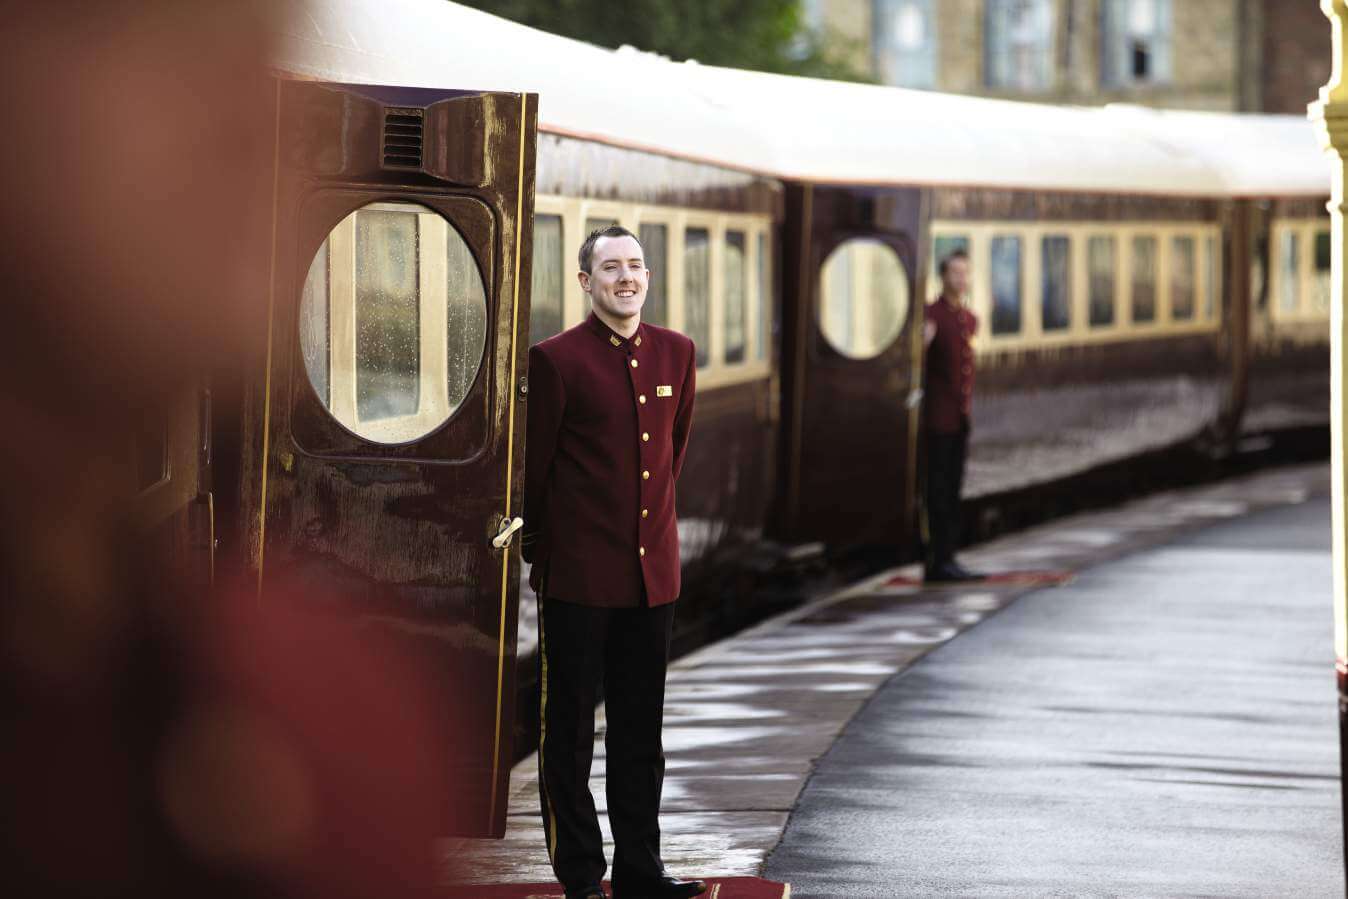 Image of train conductor on the platform outside of the Northern Belle